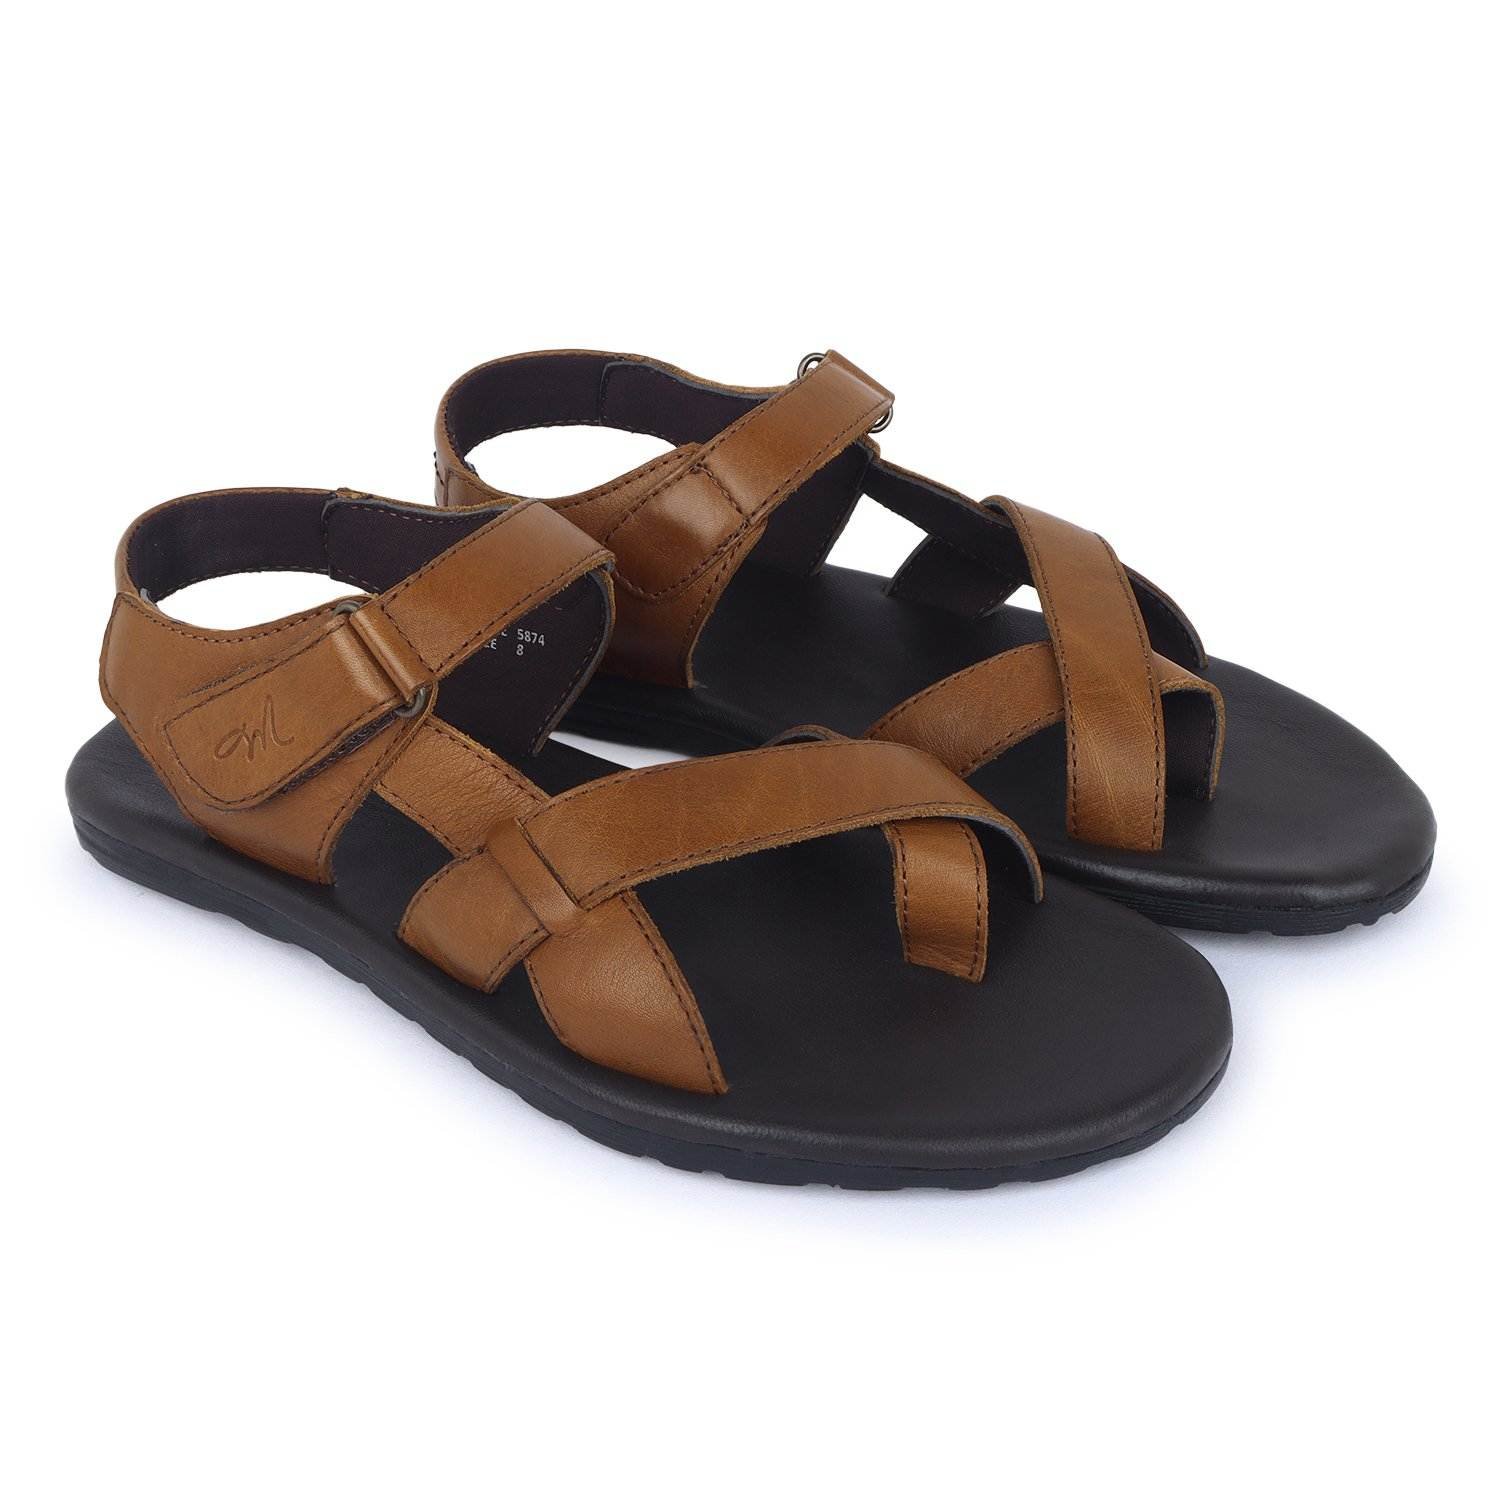 Brown Leather Single Toed Sandals for Men - Mardi Gras